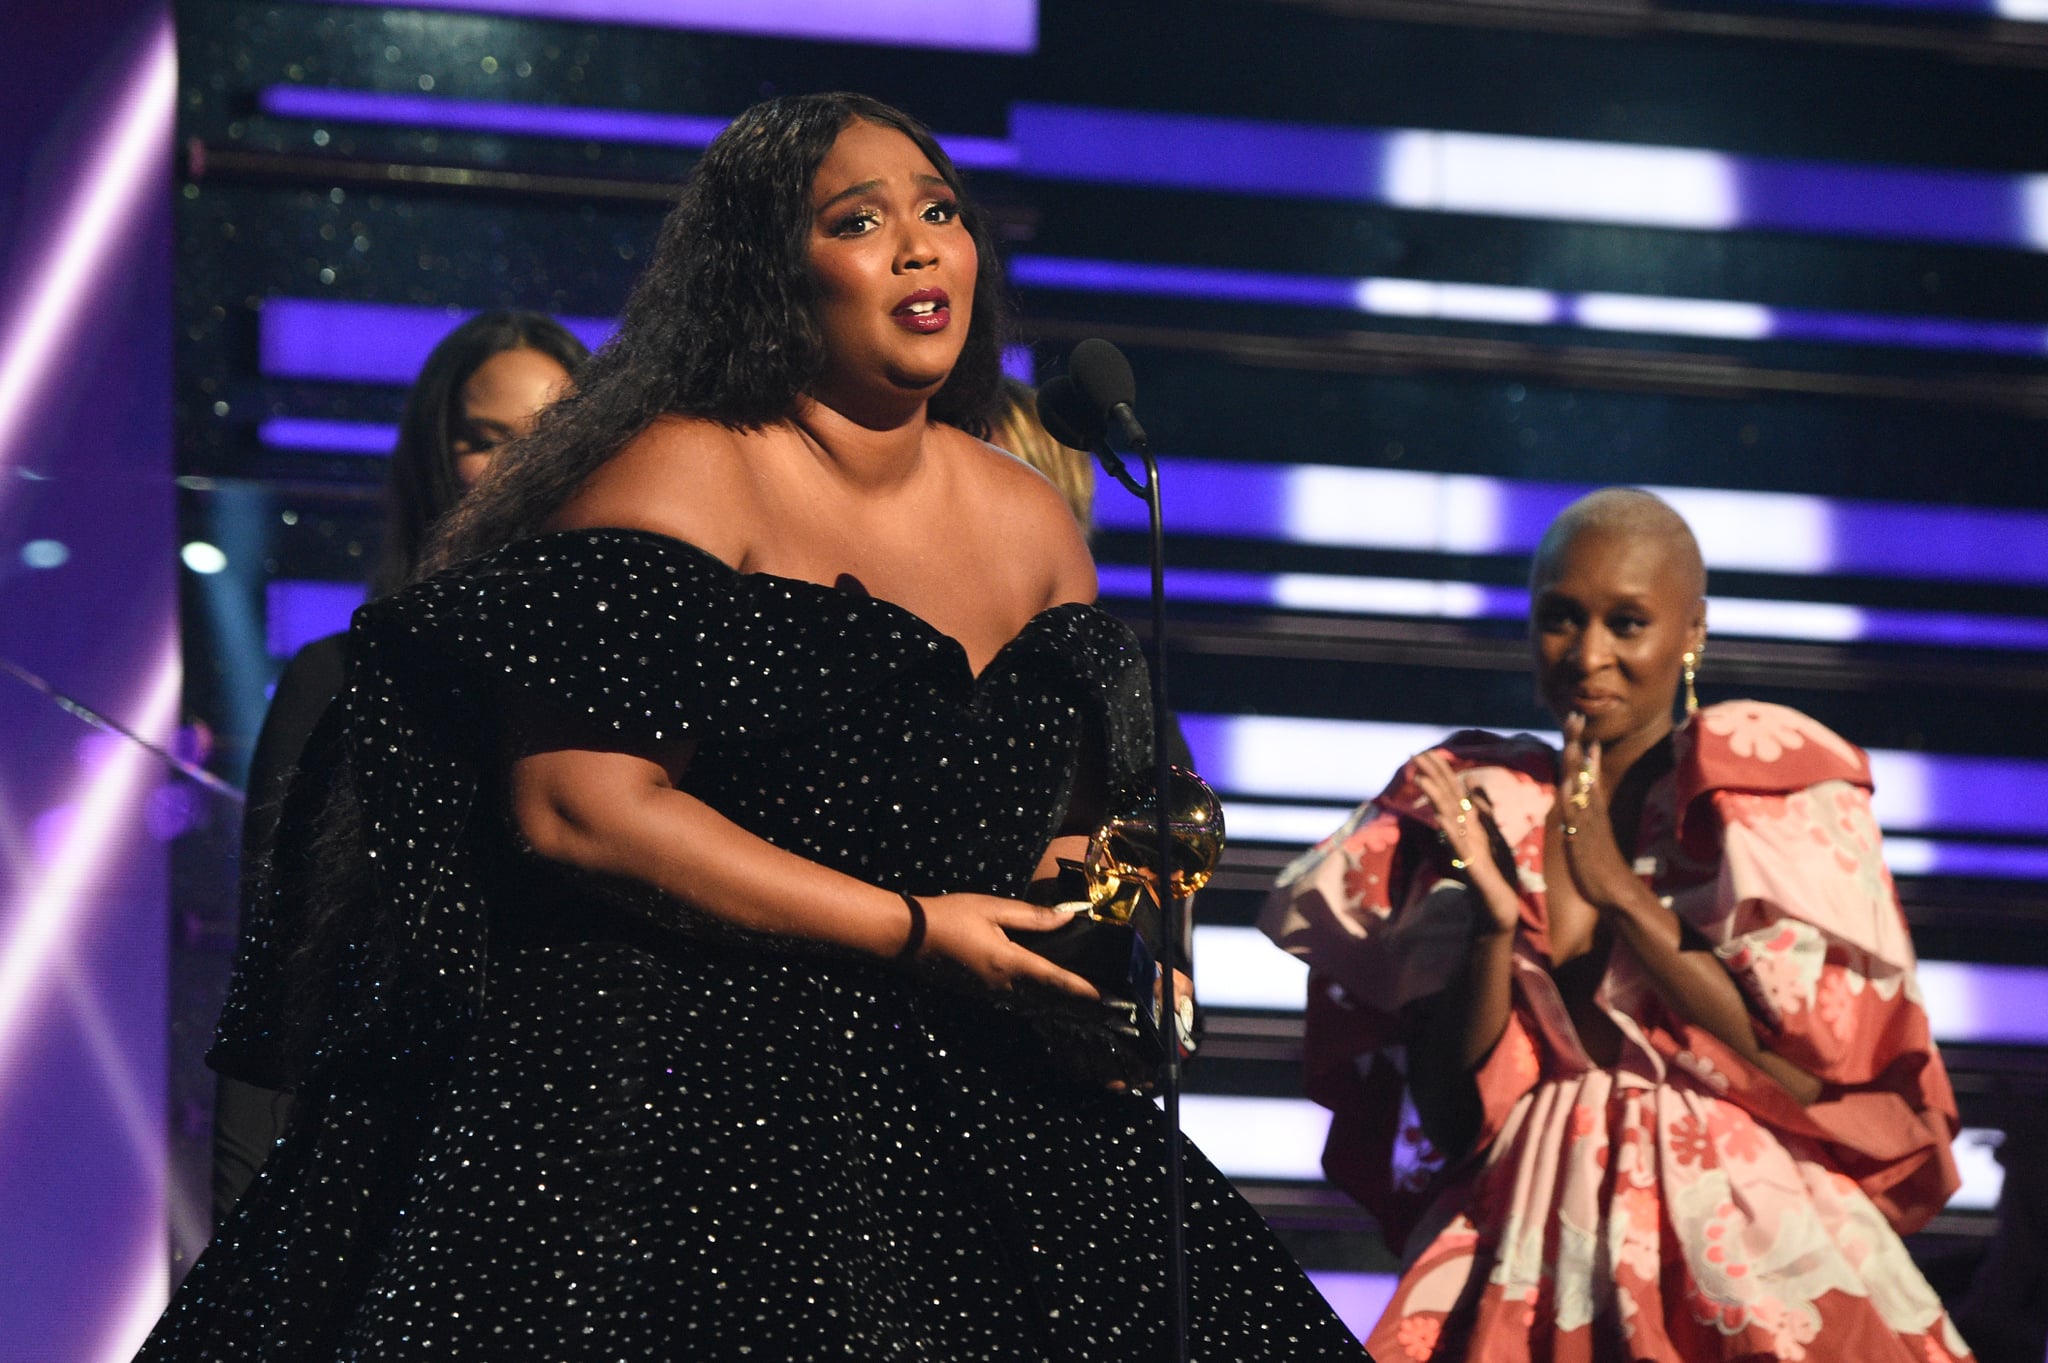 LOS ANGELES, CALIFORNIA - JANUARY 26: Lizzo accepts award for Best Urban Contemporary Album For 'Cuz I Love You (Deluxe) during the during the 62nd Annual GRAMMY Awards at STAPLES Centre on January 26, 2020 in Los Angeles, California. (Photo by Kevin Mazur/Getty Images for The Recording Academy)